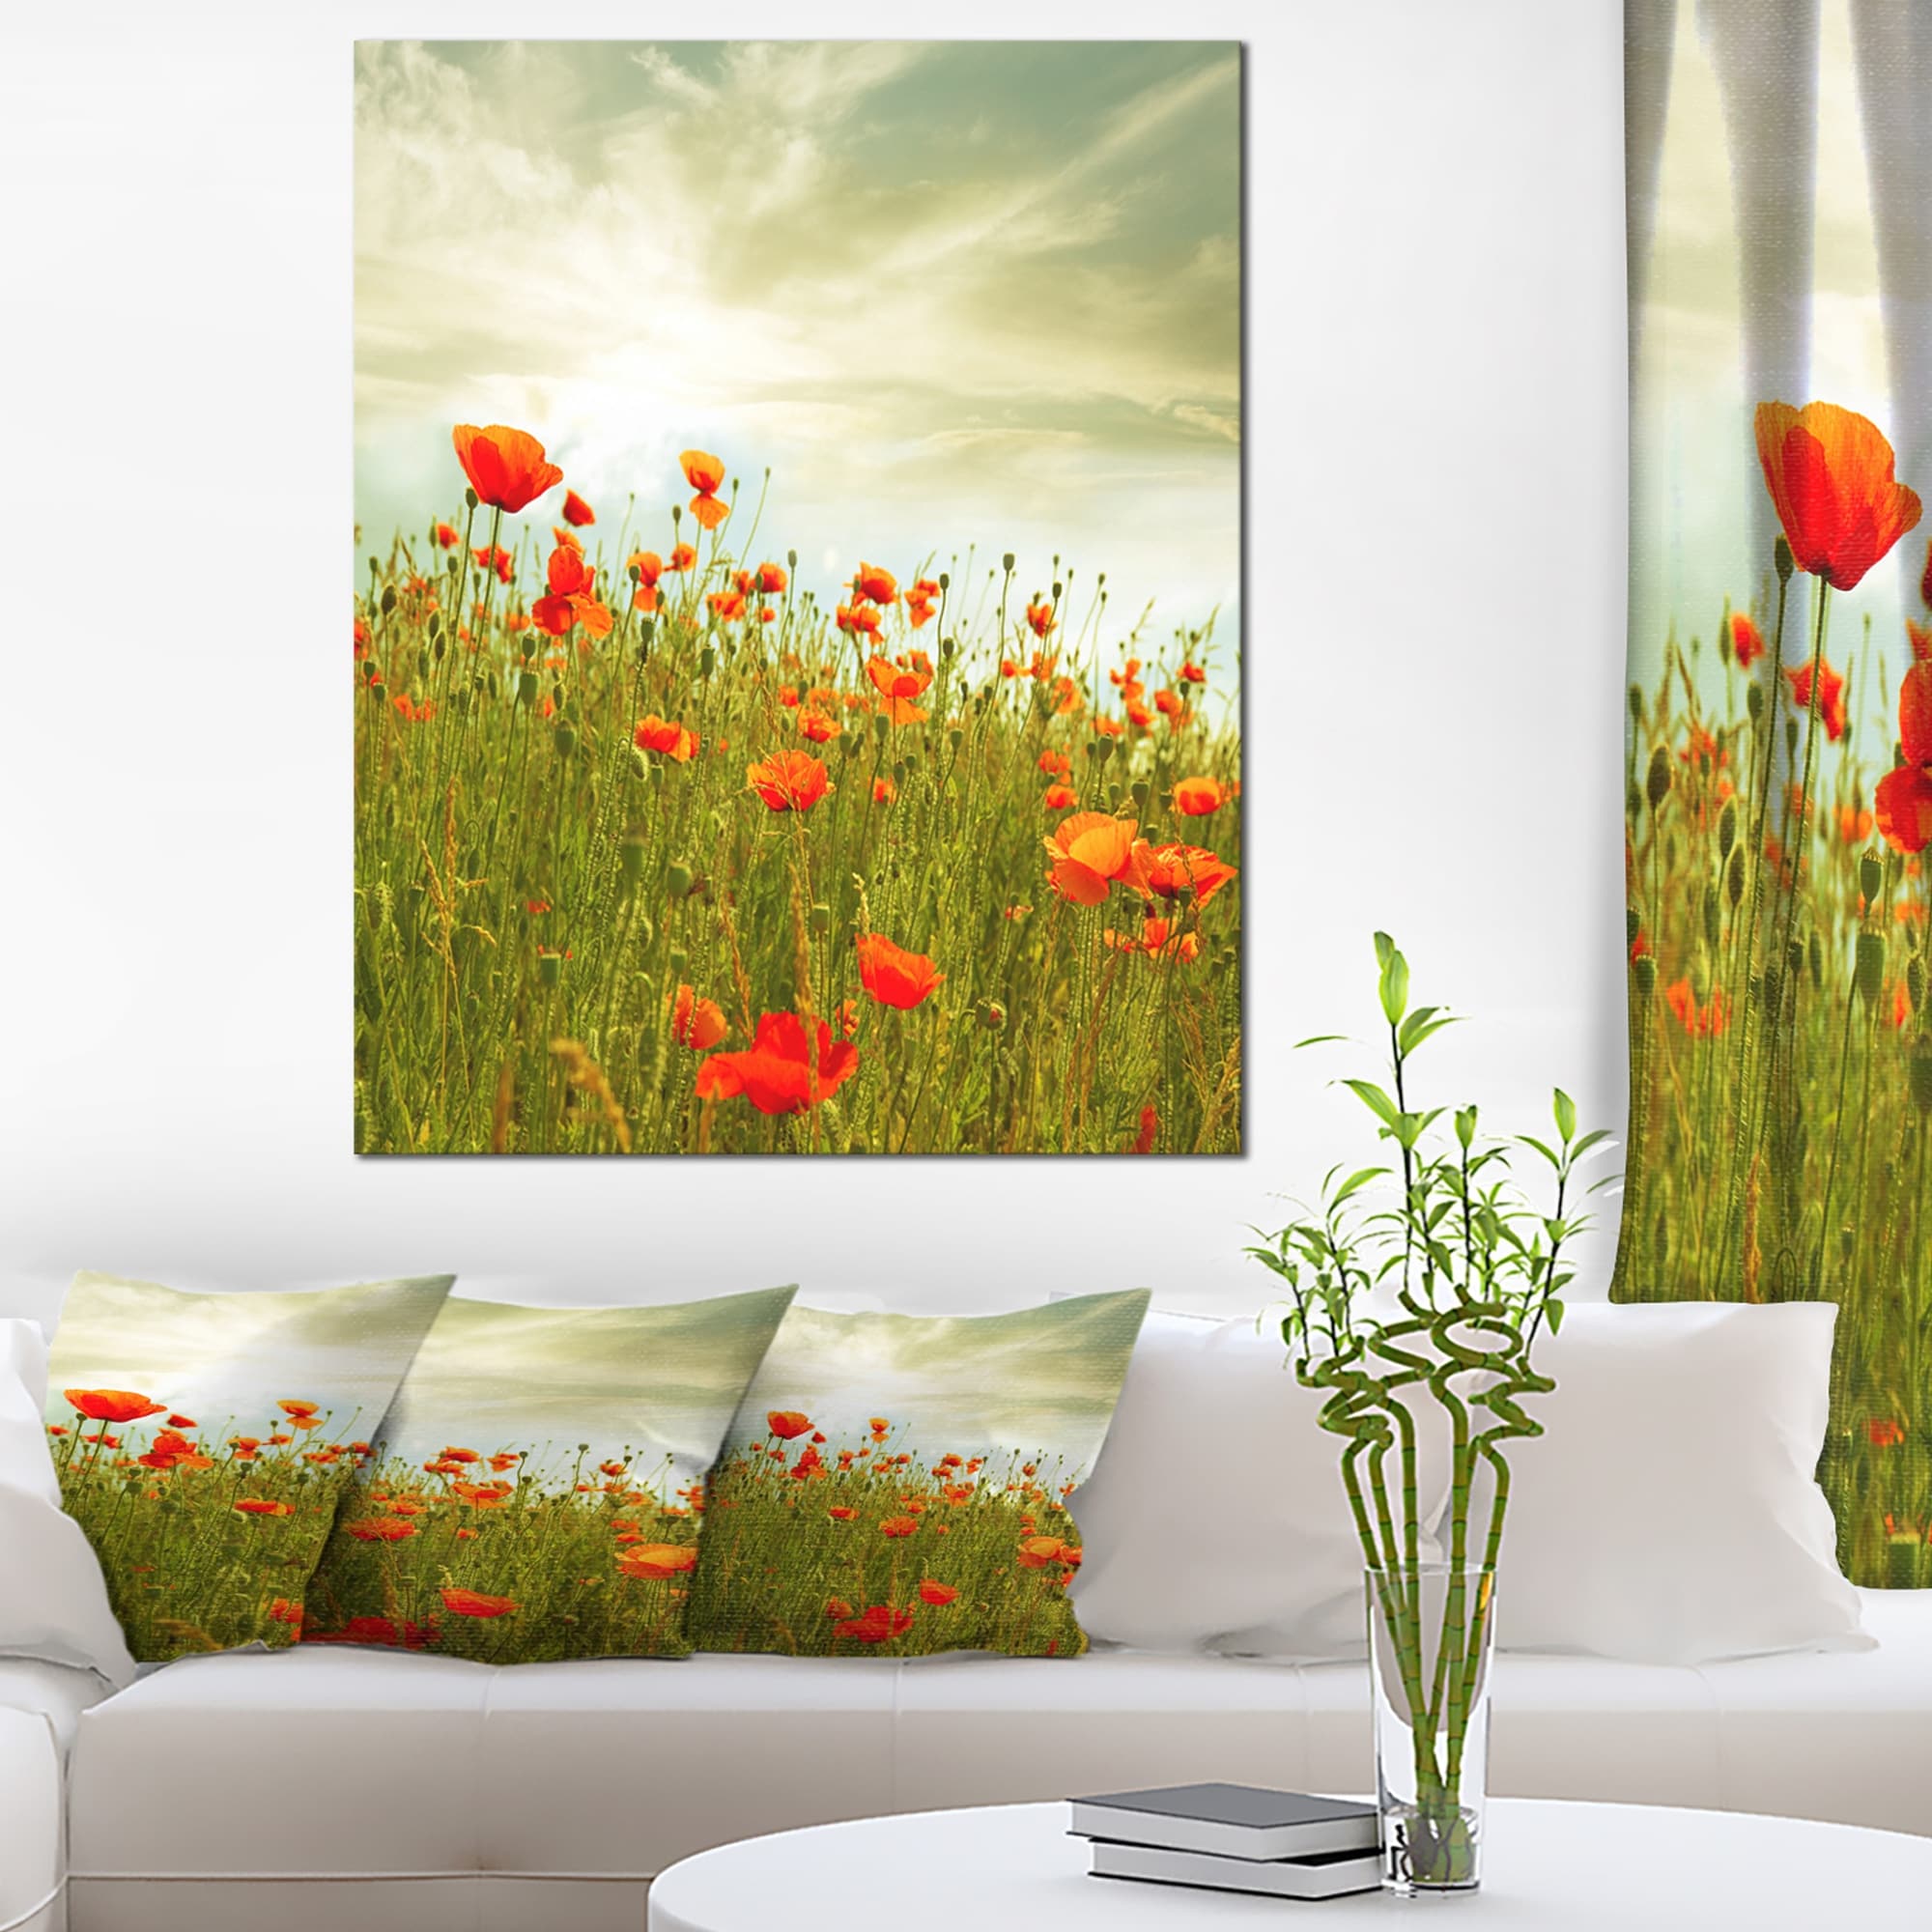 https://ak1.ostkcdn.com/images/products/is/images/direct/7cd0f3b271a37b64487344fbe1840dbe00a9869c/Designart-%22Red-Poppy-Flowers-in-Green-Field%22-Extra-Large-Floral-Canvas-Art.jpg